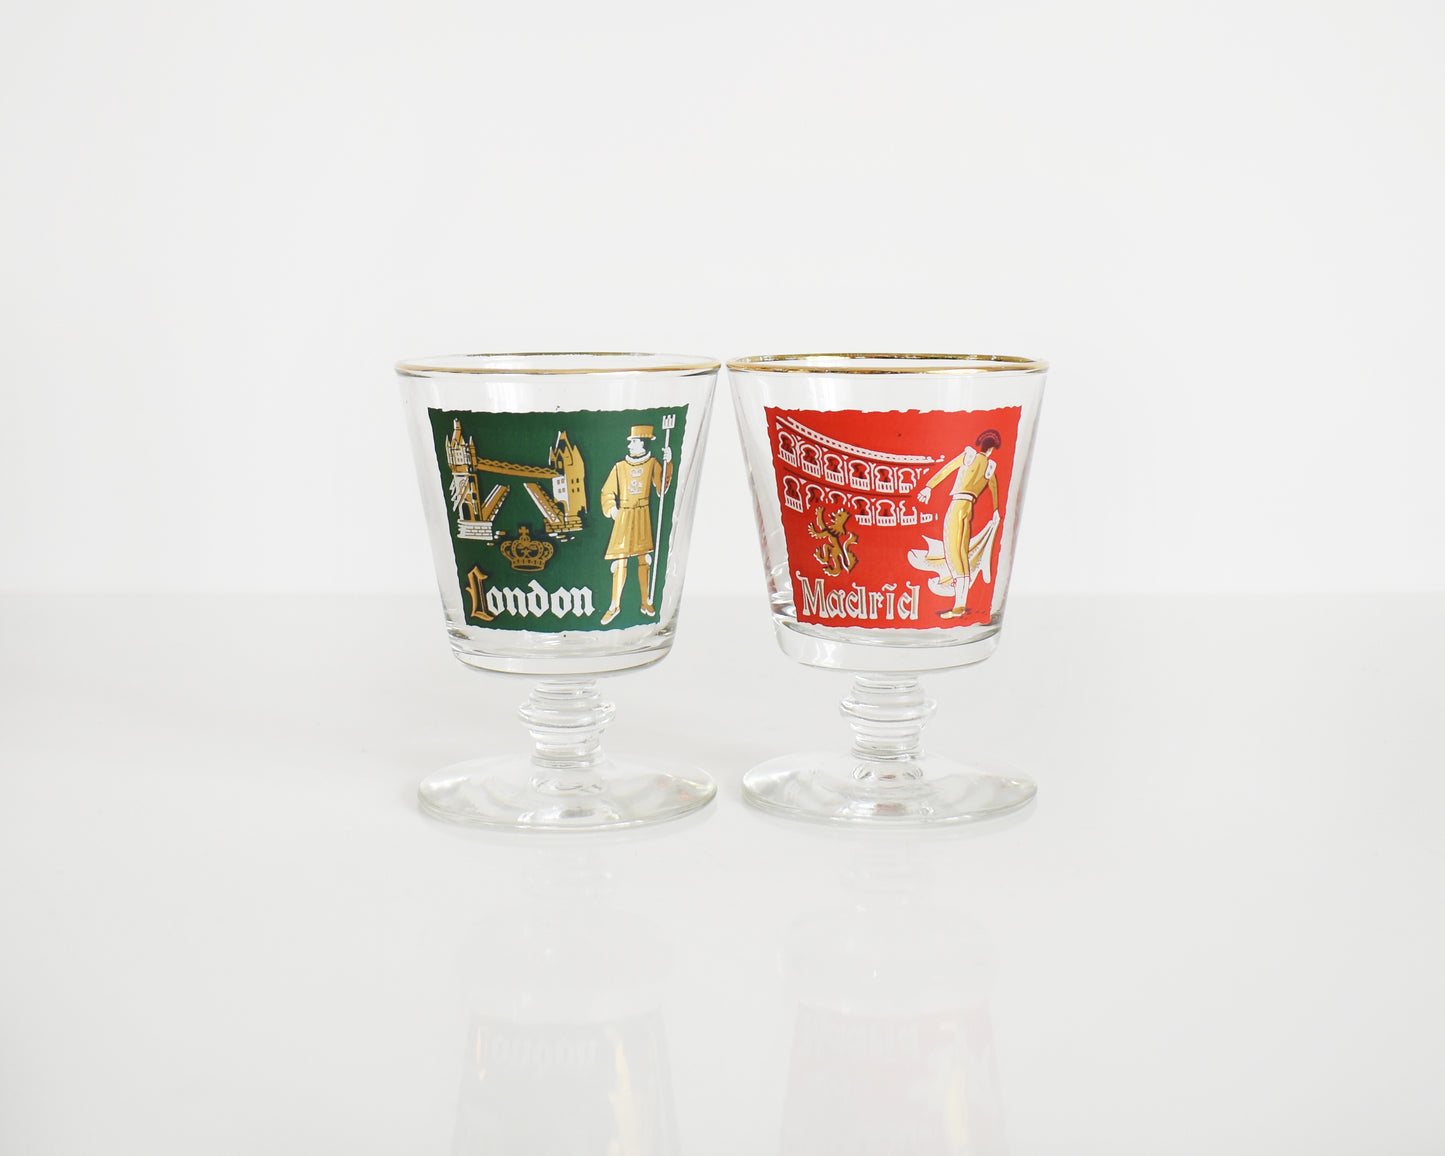 The London and Madrid glasses